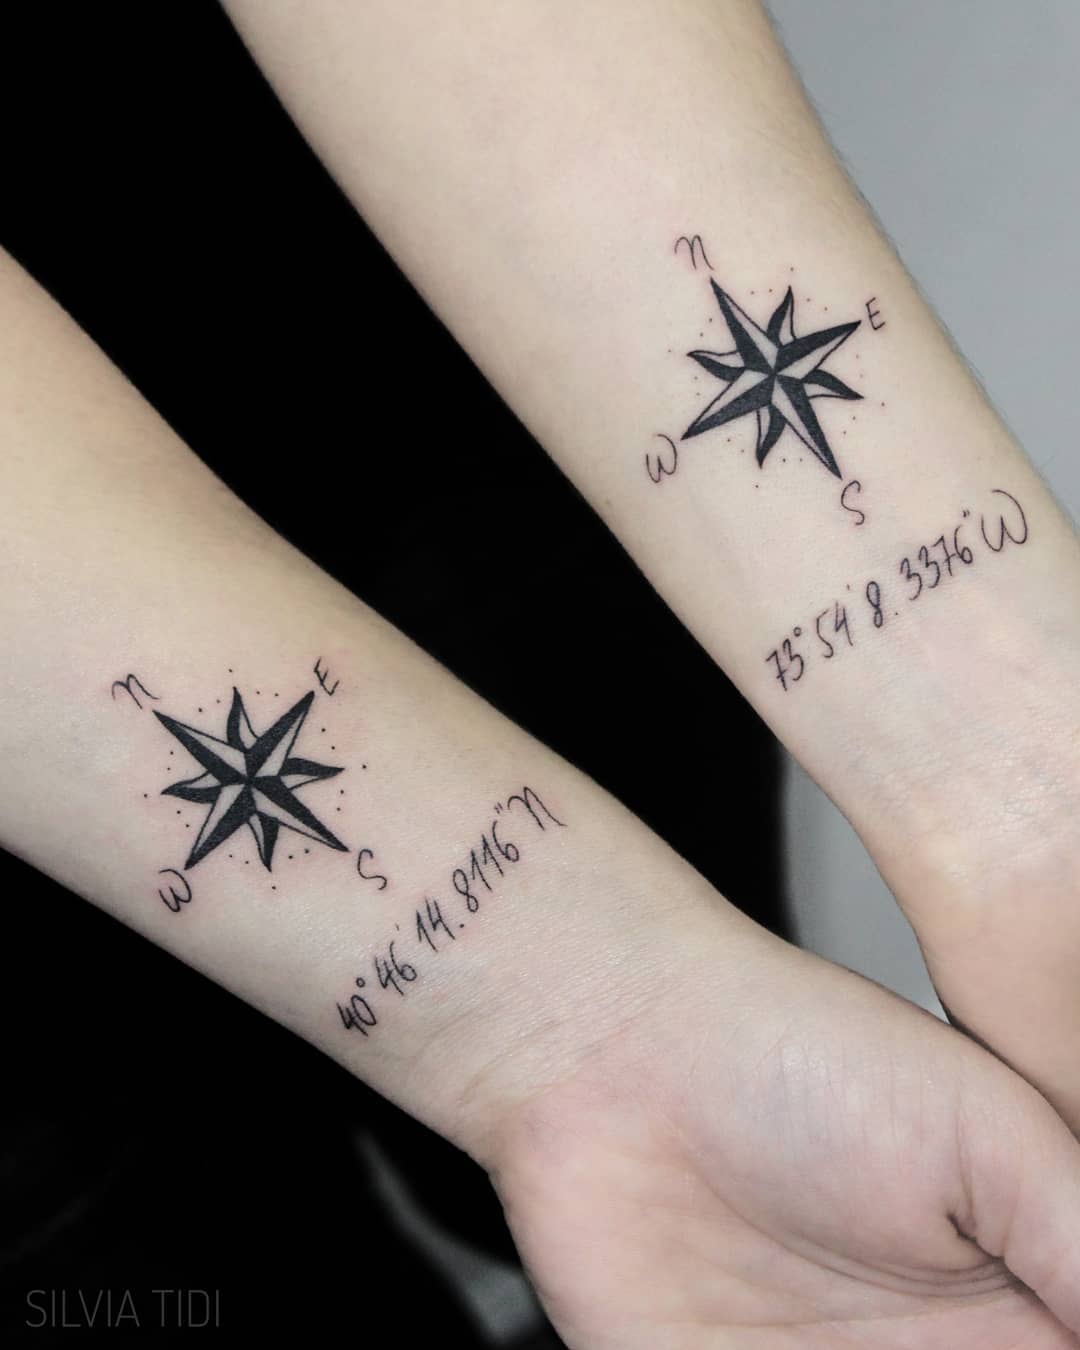 Compass and coordinate tattoo.